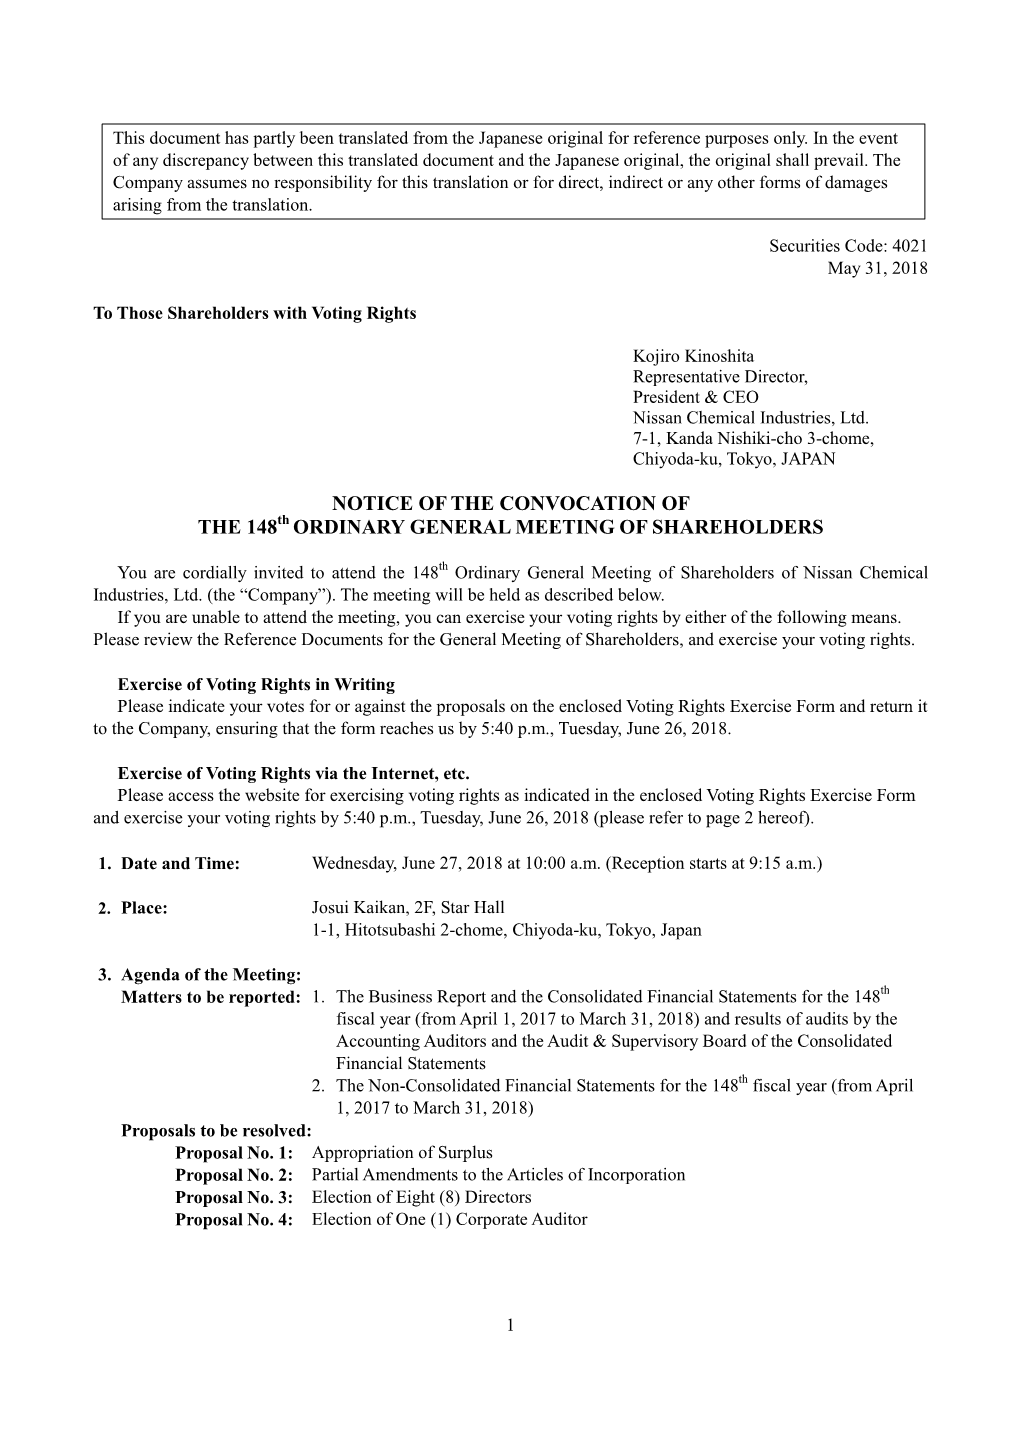 NOTICE of the CONVOCATION of the 148Th ORDINARY GENERAL MEETING of SHAREHOLDERS